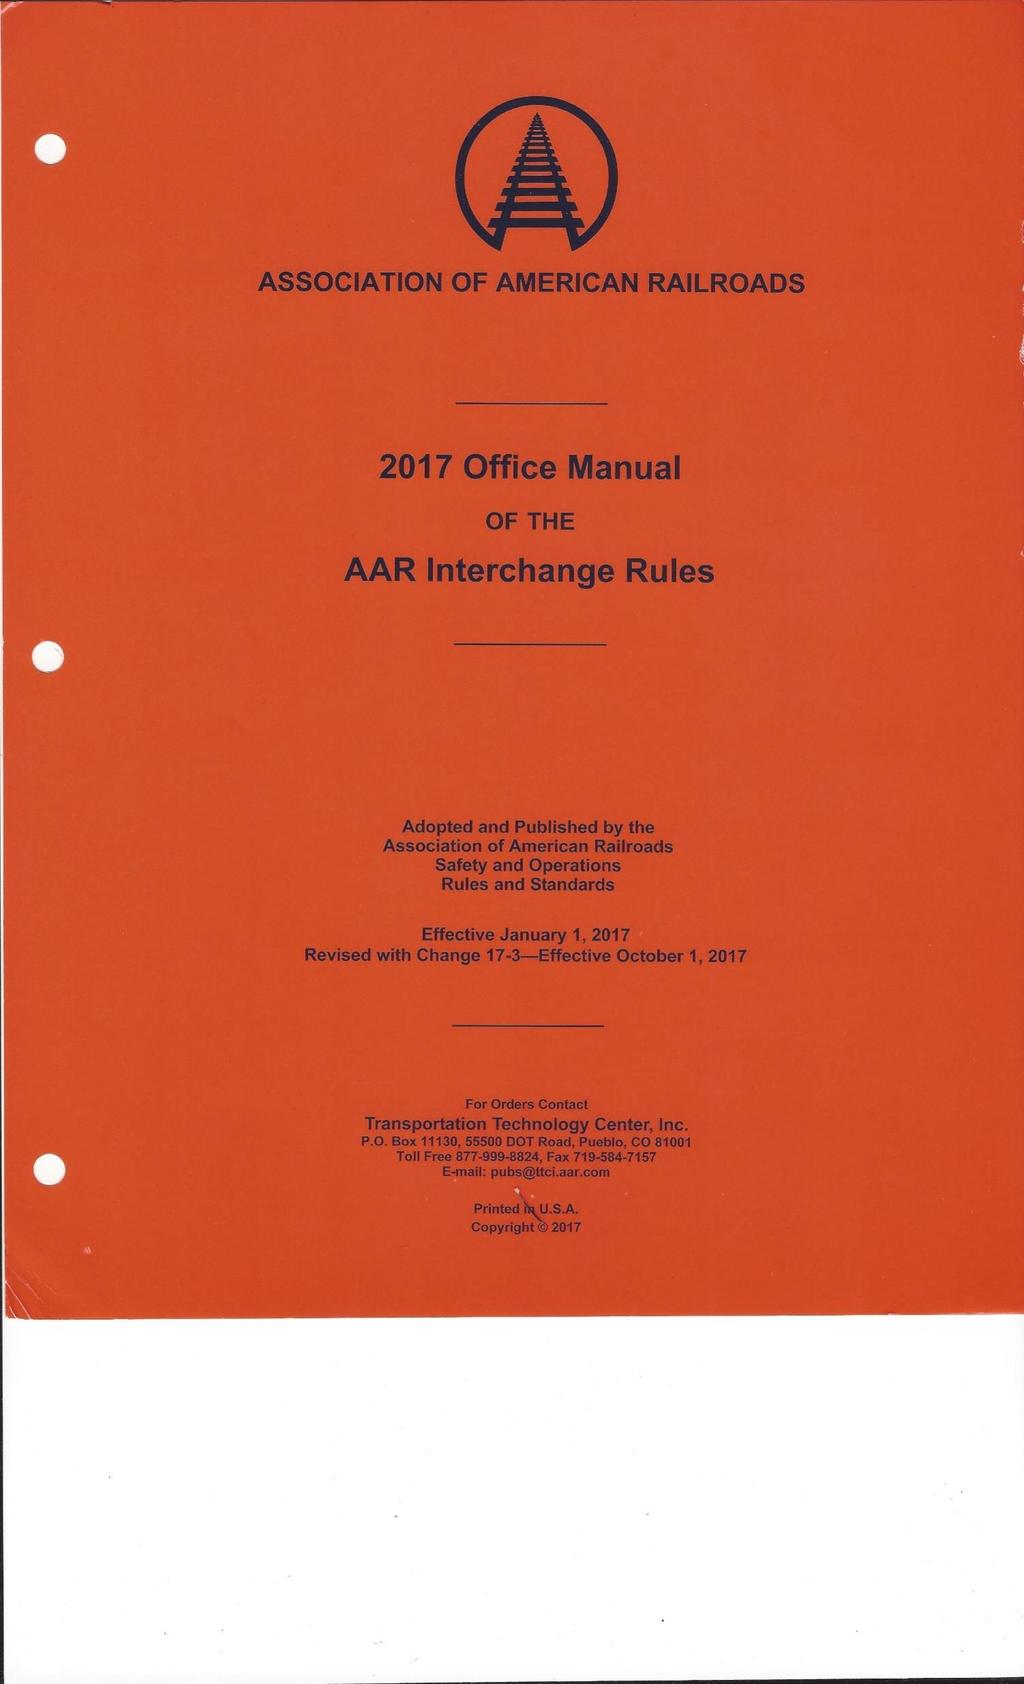 The Interchange Rules The term Interchange rules applies to the rules found in the Field and Office manuals published by the Association of American Railroads.